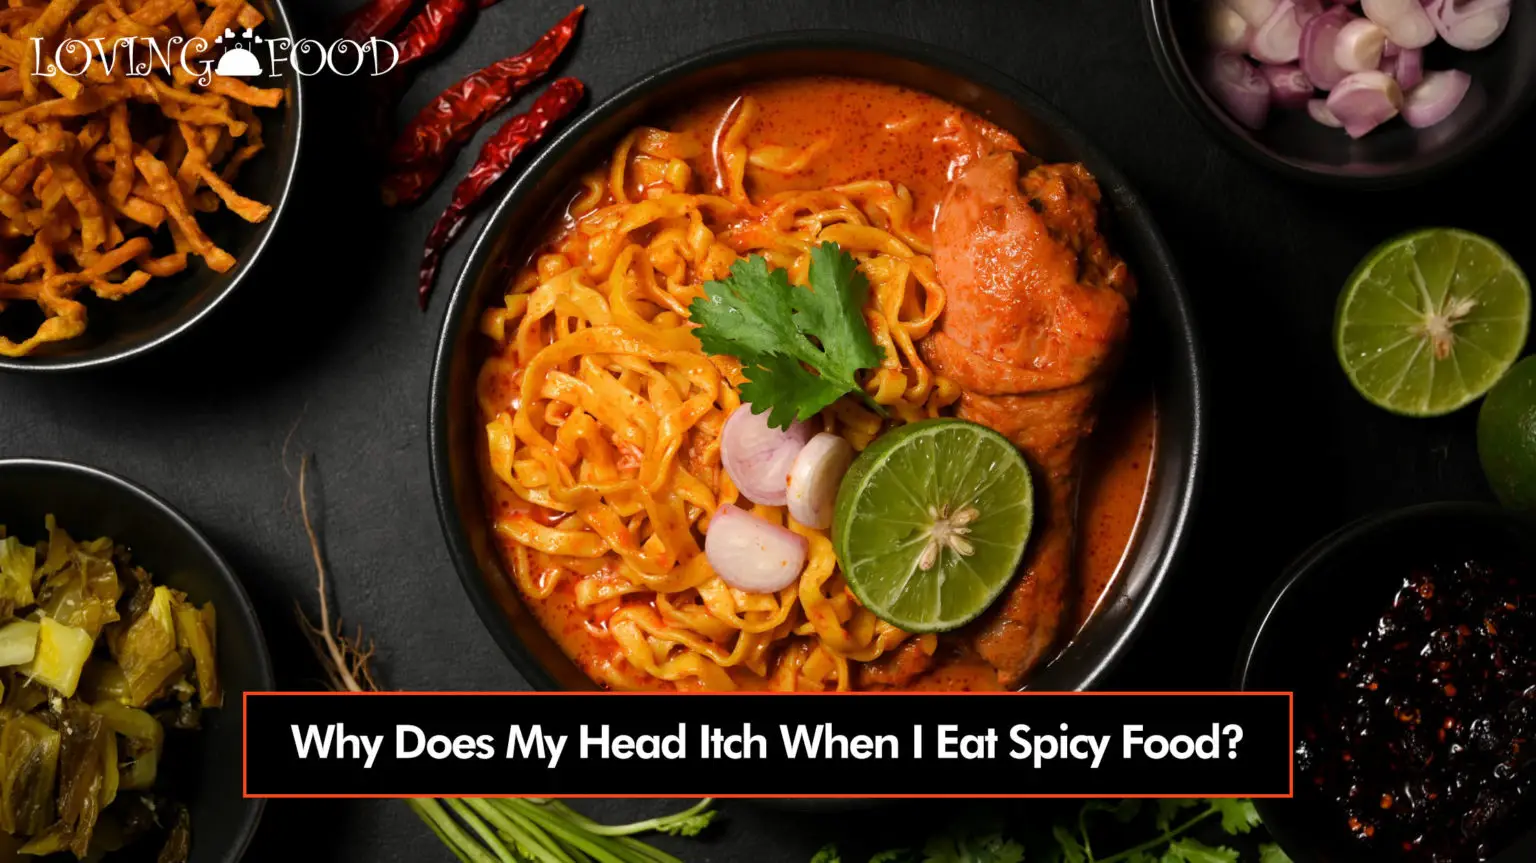 Why Does My Head Itch When I Eat Spicy Food? | Loving Food